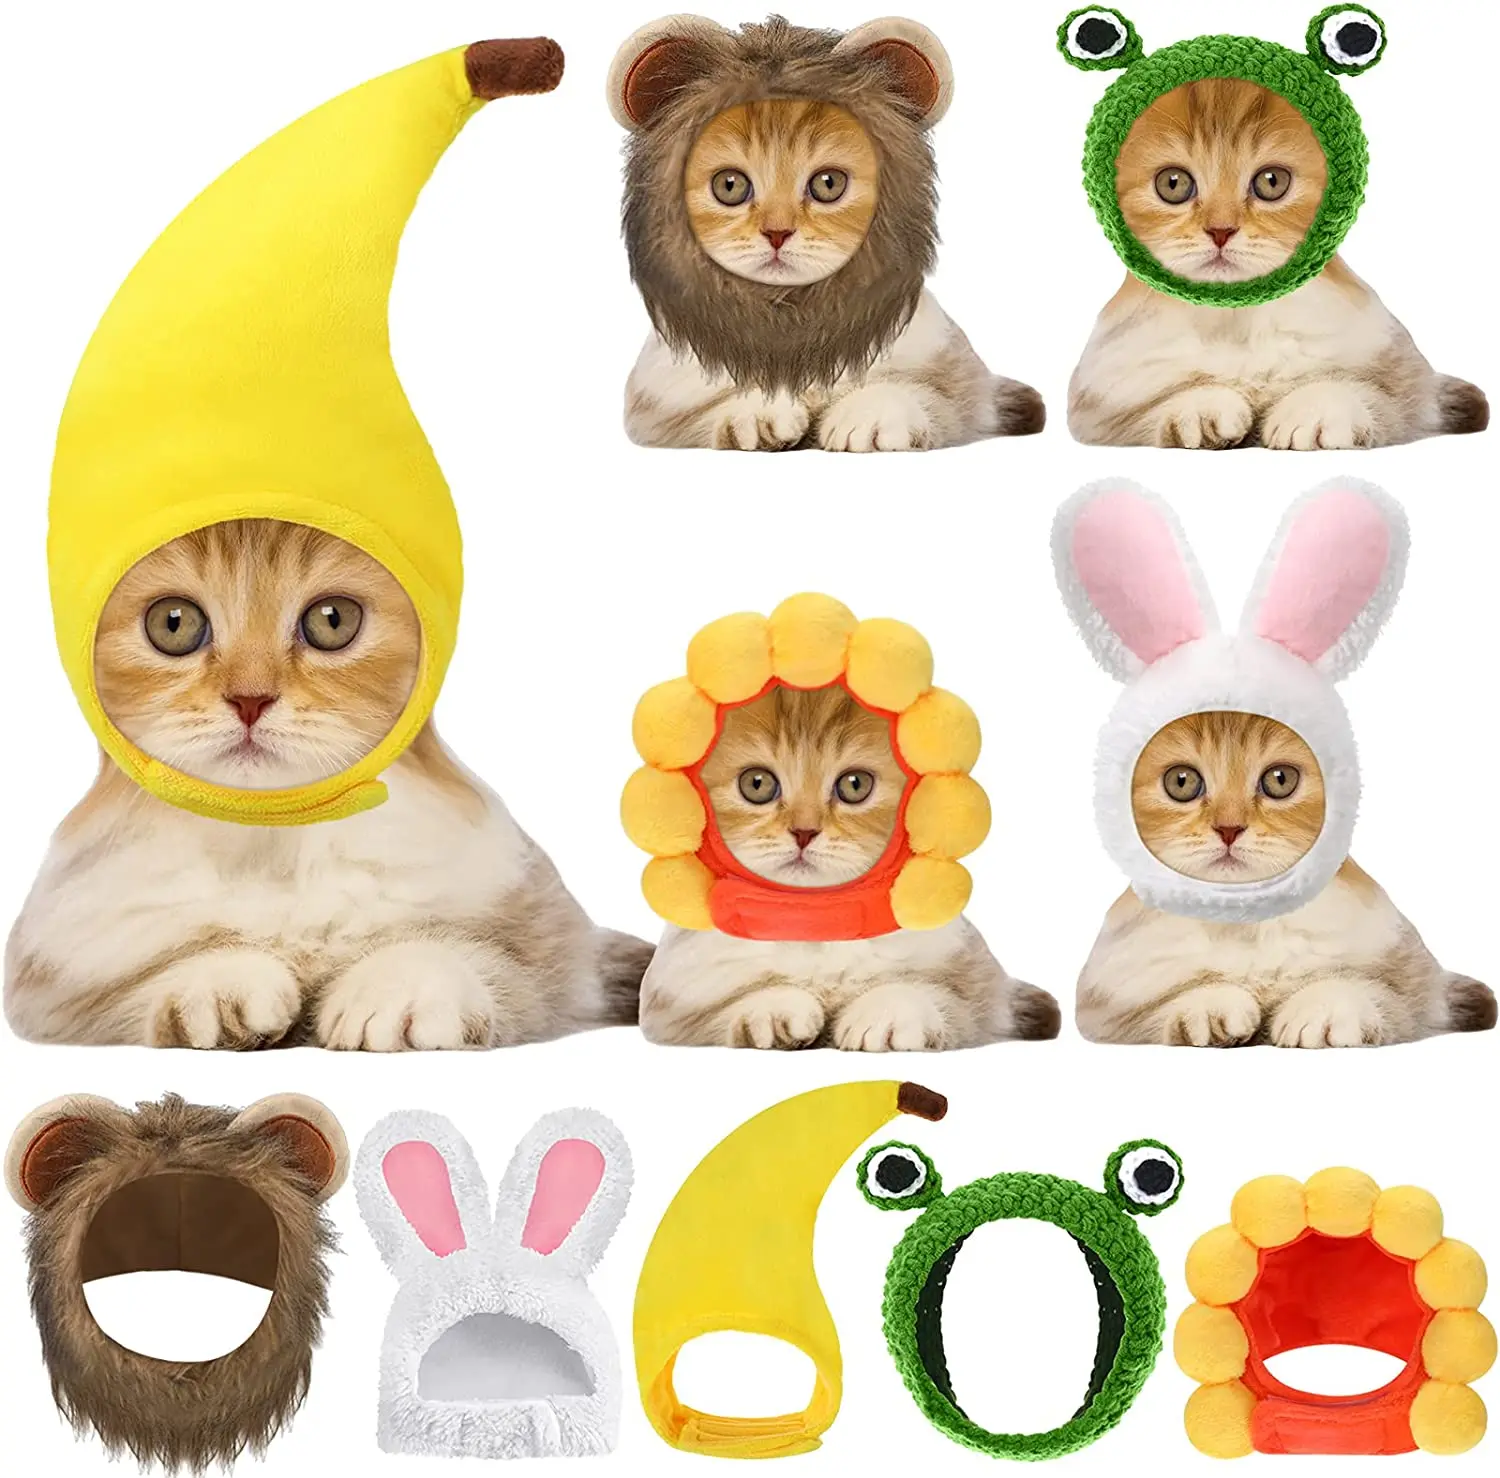 

5 Pcs Cat Hat Adorable Costume Bunny Hat with Ears Funny Mane Cat Hat for Cats and Small Dogs Kitten Puppy Party Headwear